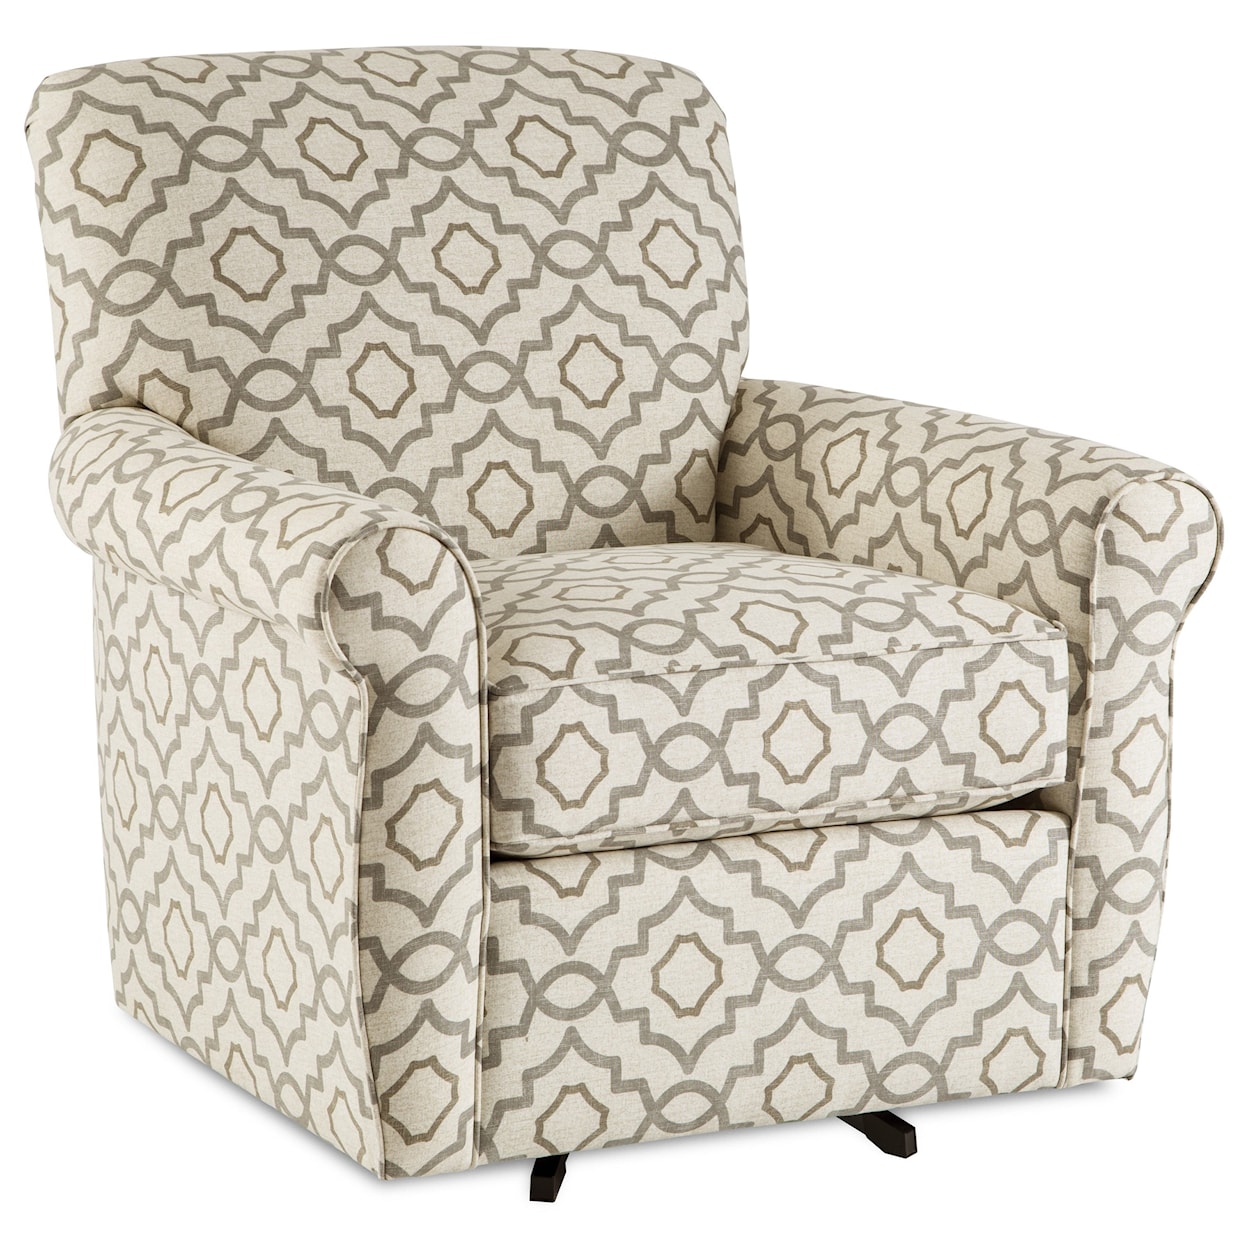 Hickory Craft 075610-075710 Swivel Chair